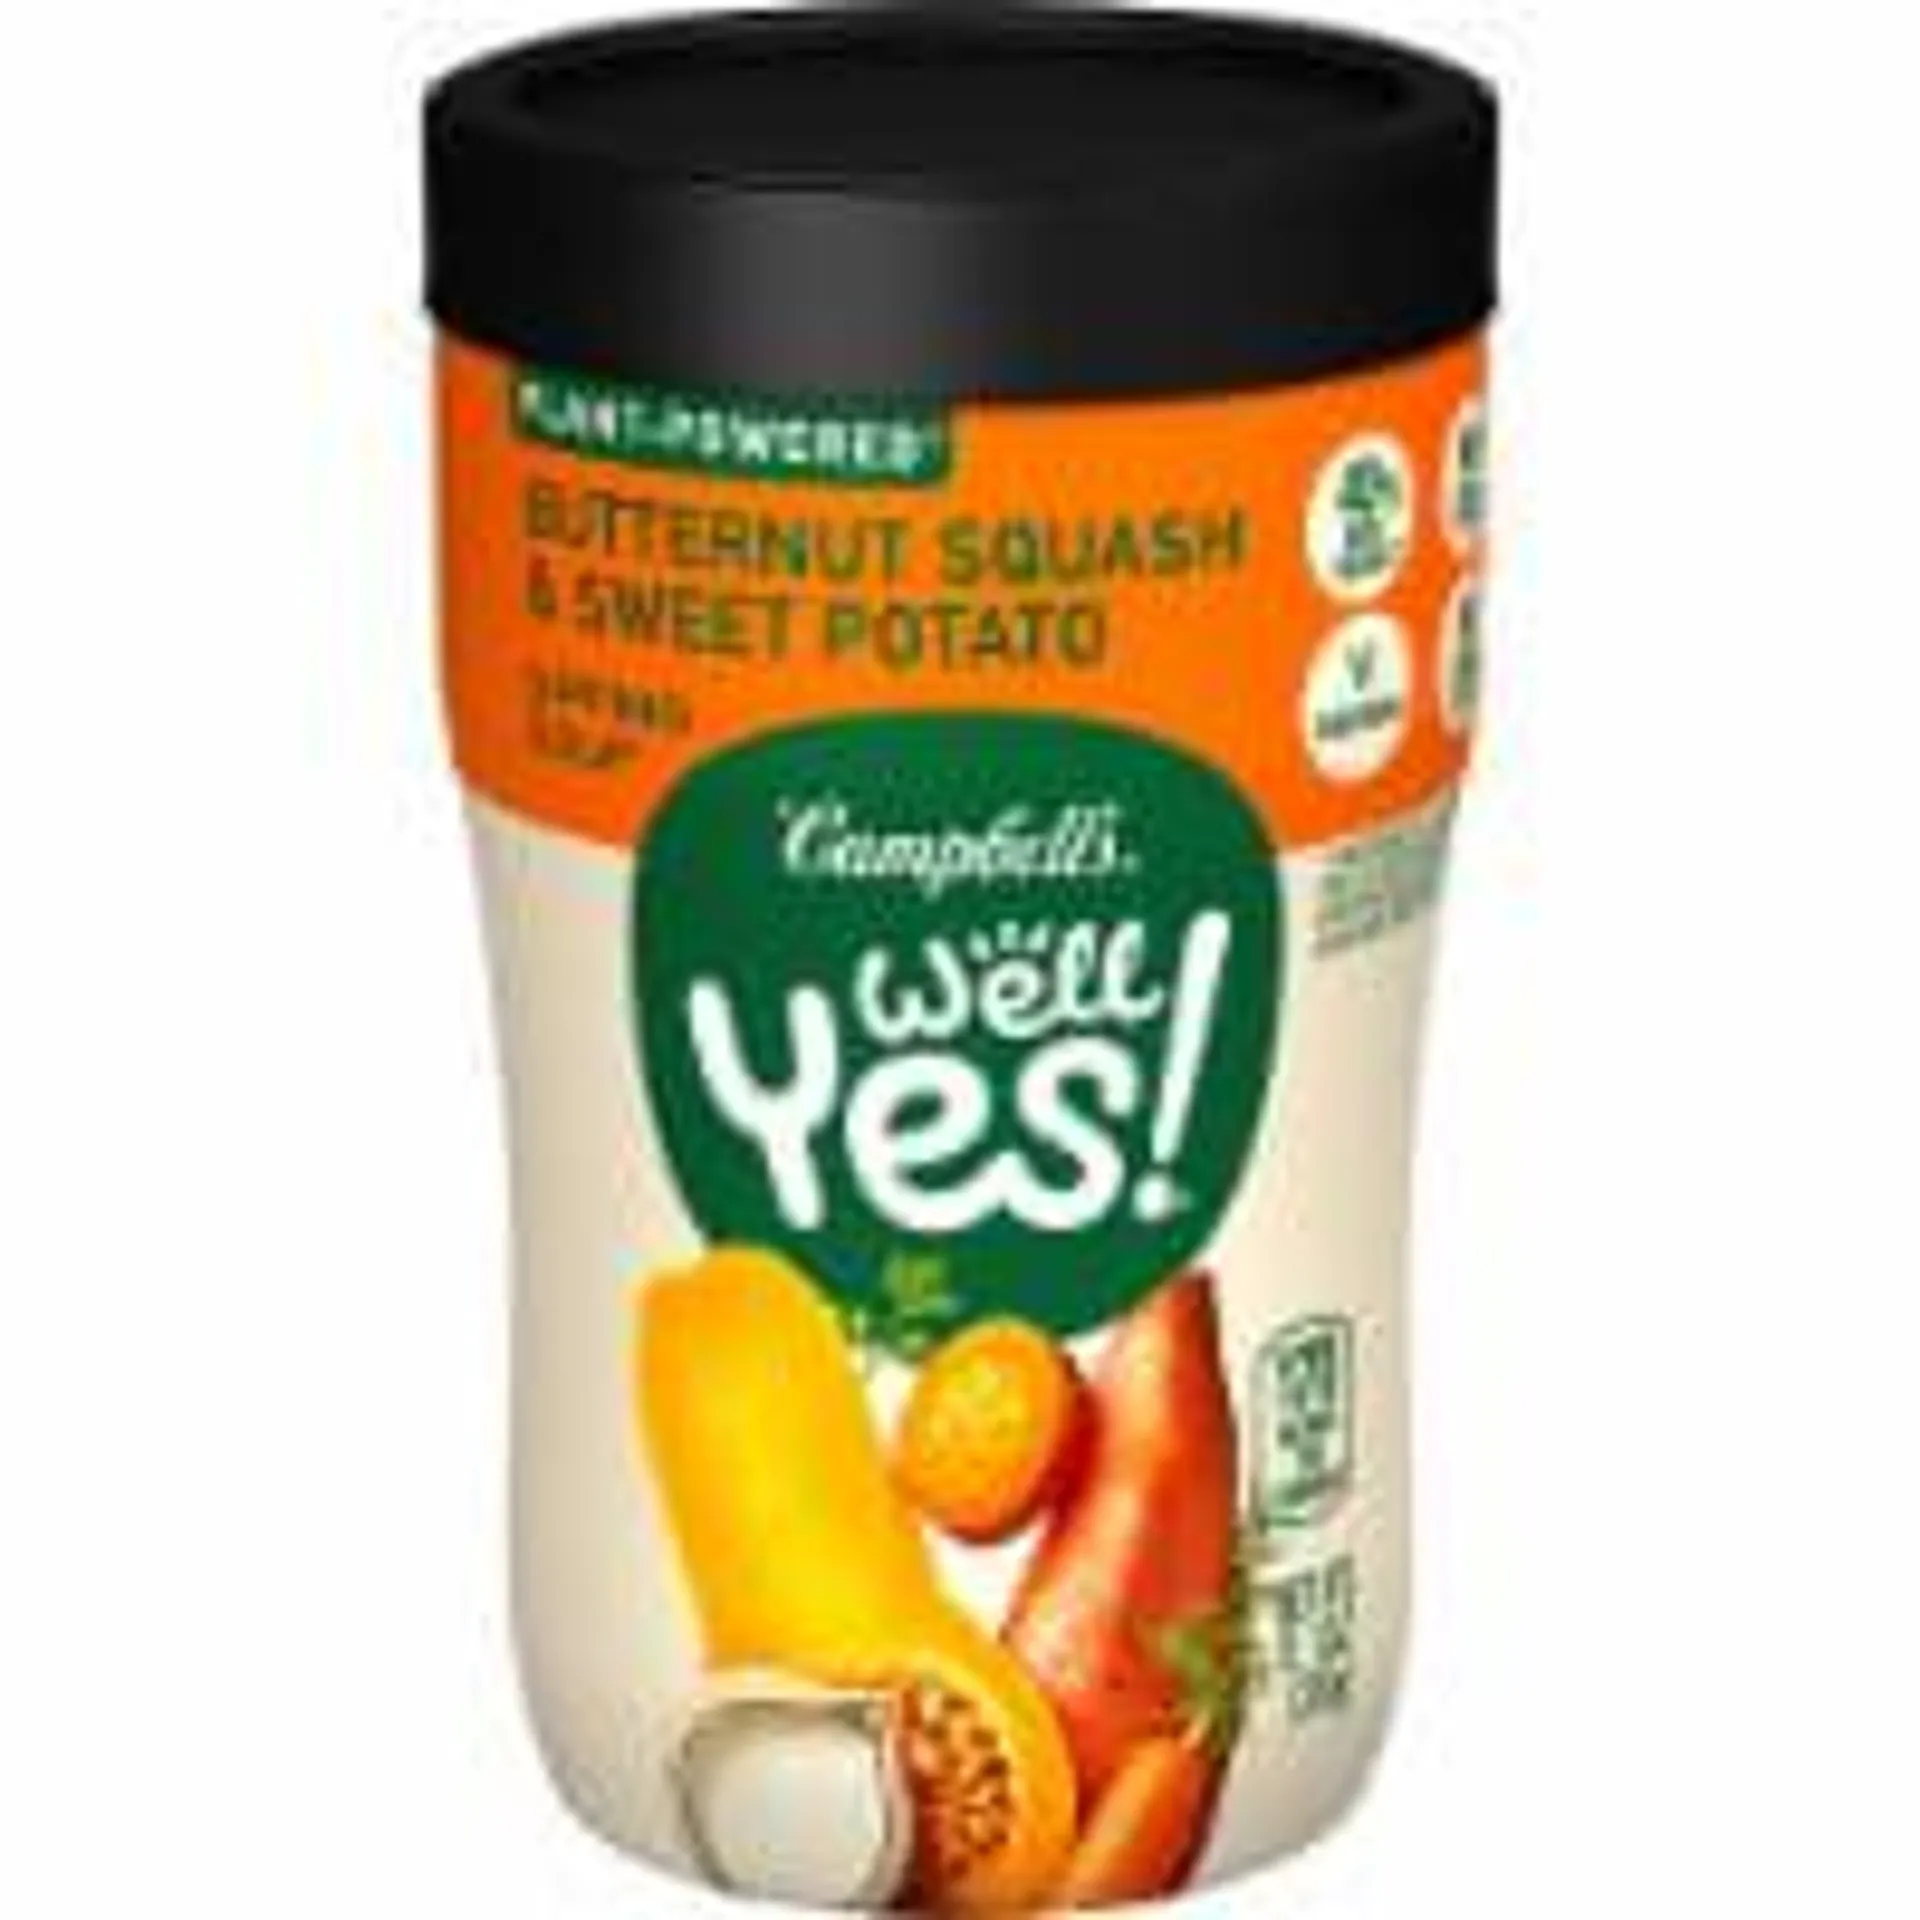 Campbell's® Well Yes!® Sipping Soup Butternut Squash and Sweet Potato Soup Microwavable Cup